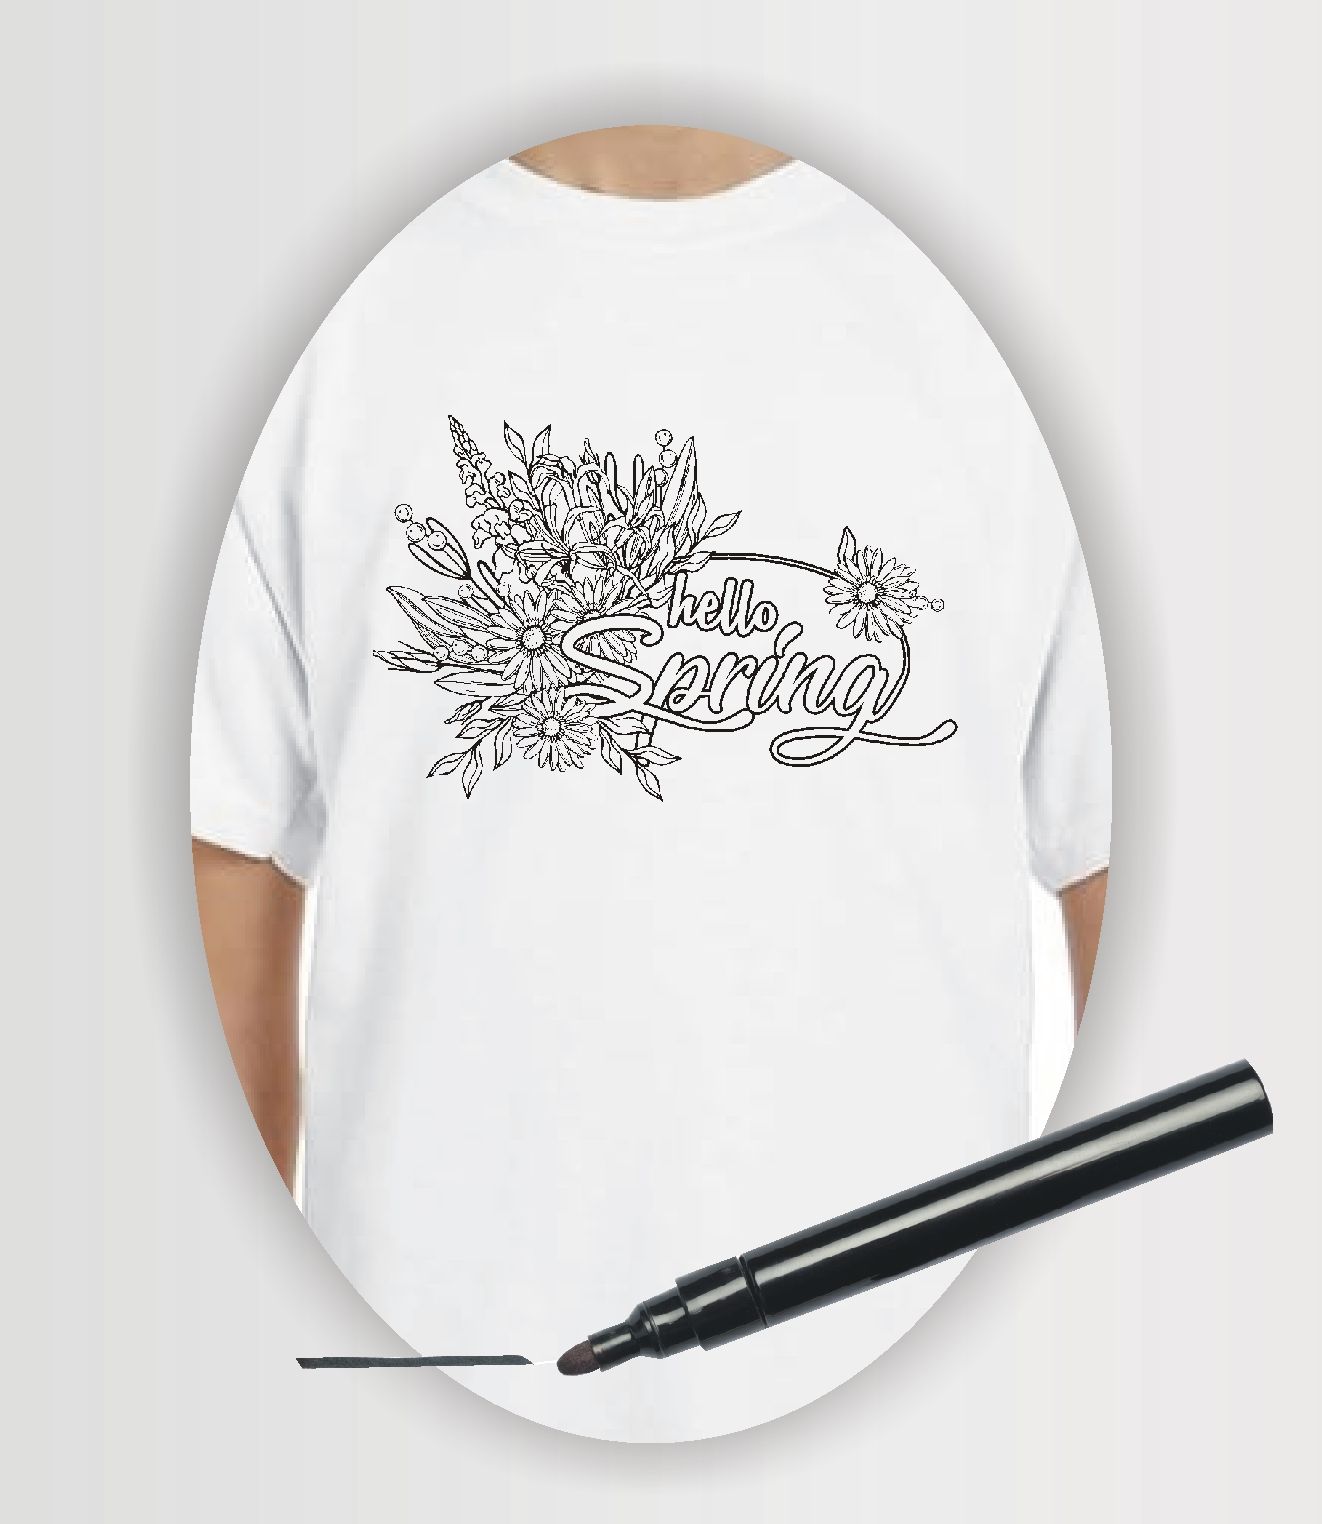 Wearable Art colouring t-shirt with "hello Spring" and a collection of flowers on a white t-shirt